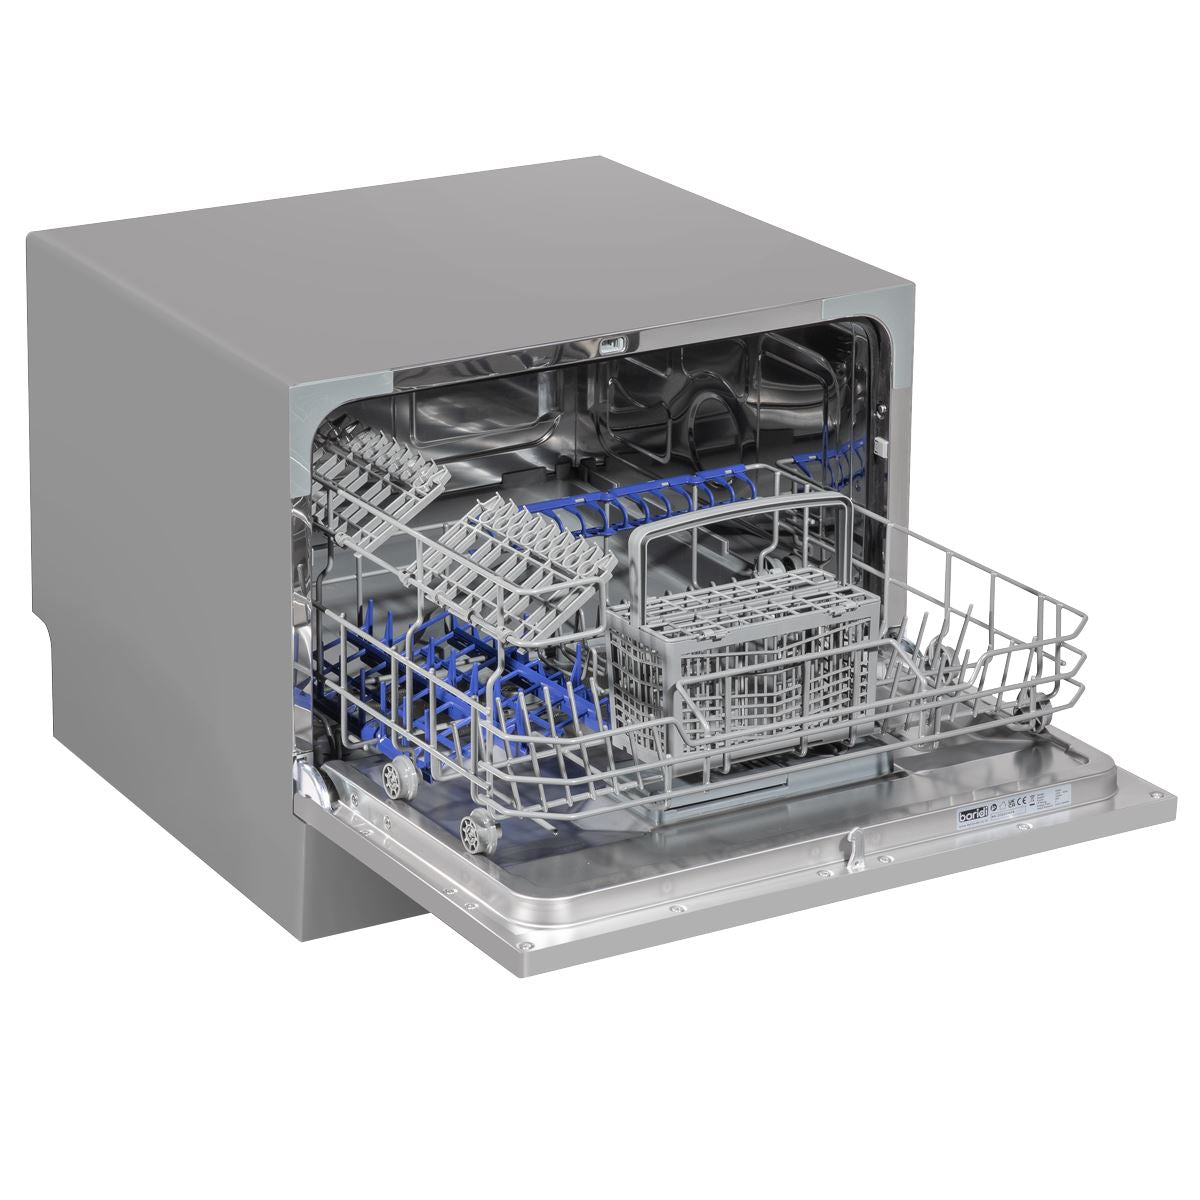 Baridi Compact Tabletop Dishwasher 6 Place Settings, 6 Programmes, Low Noise, 6.5L Cycle, Start Delay - Silver